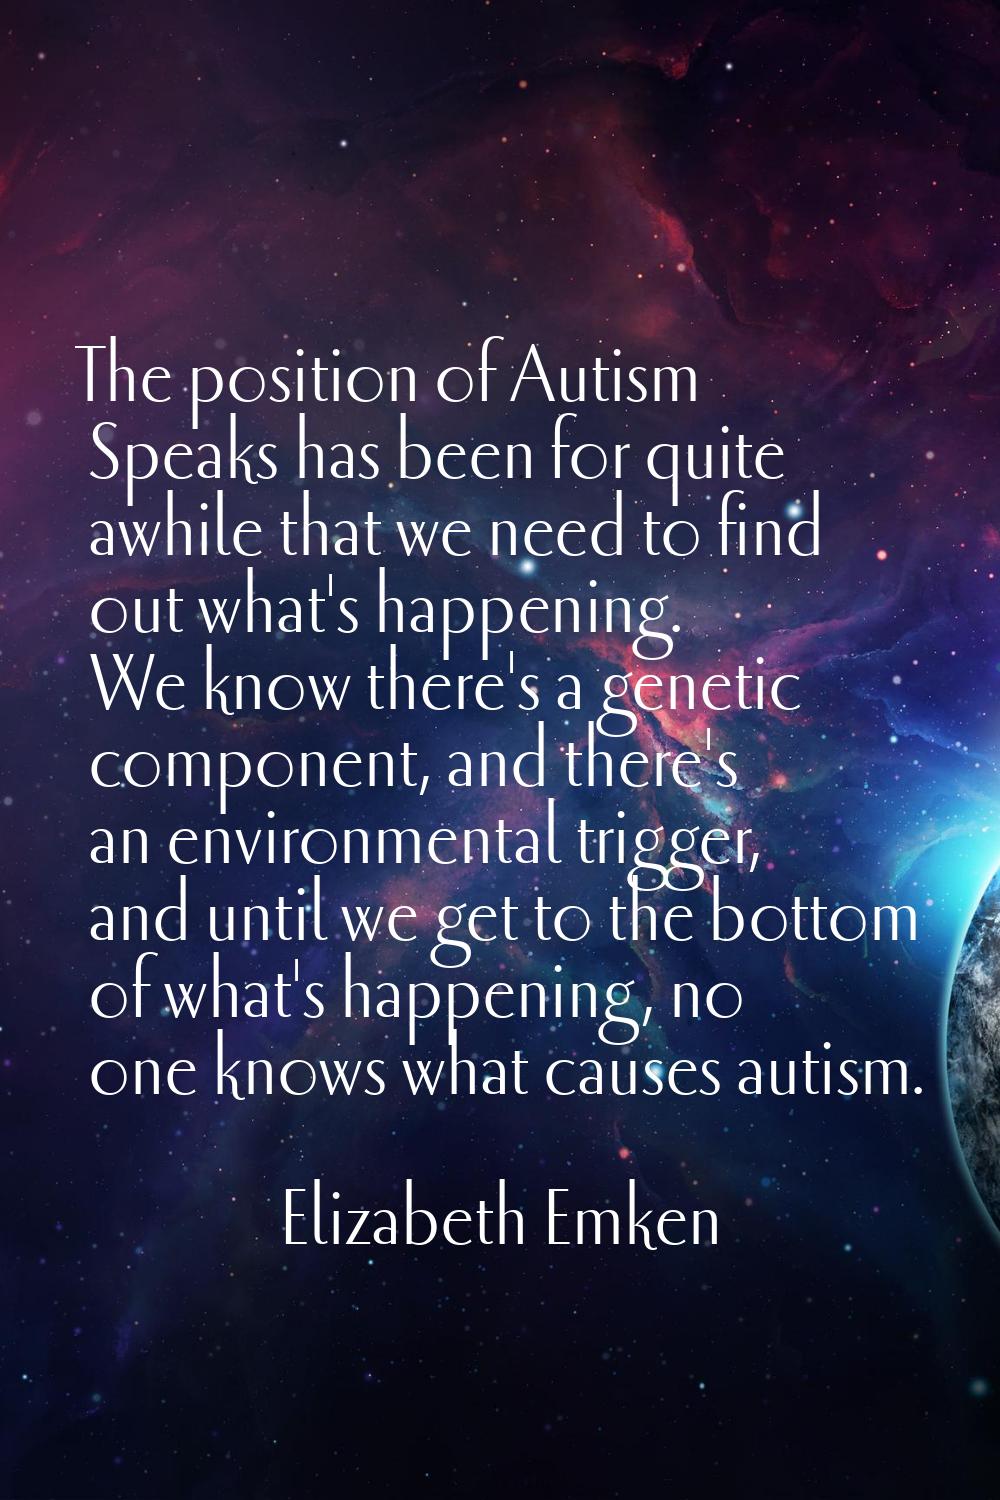 The position of Autism Speaks has been for quite awhile that we need to find out what's happening. 